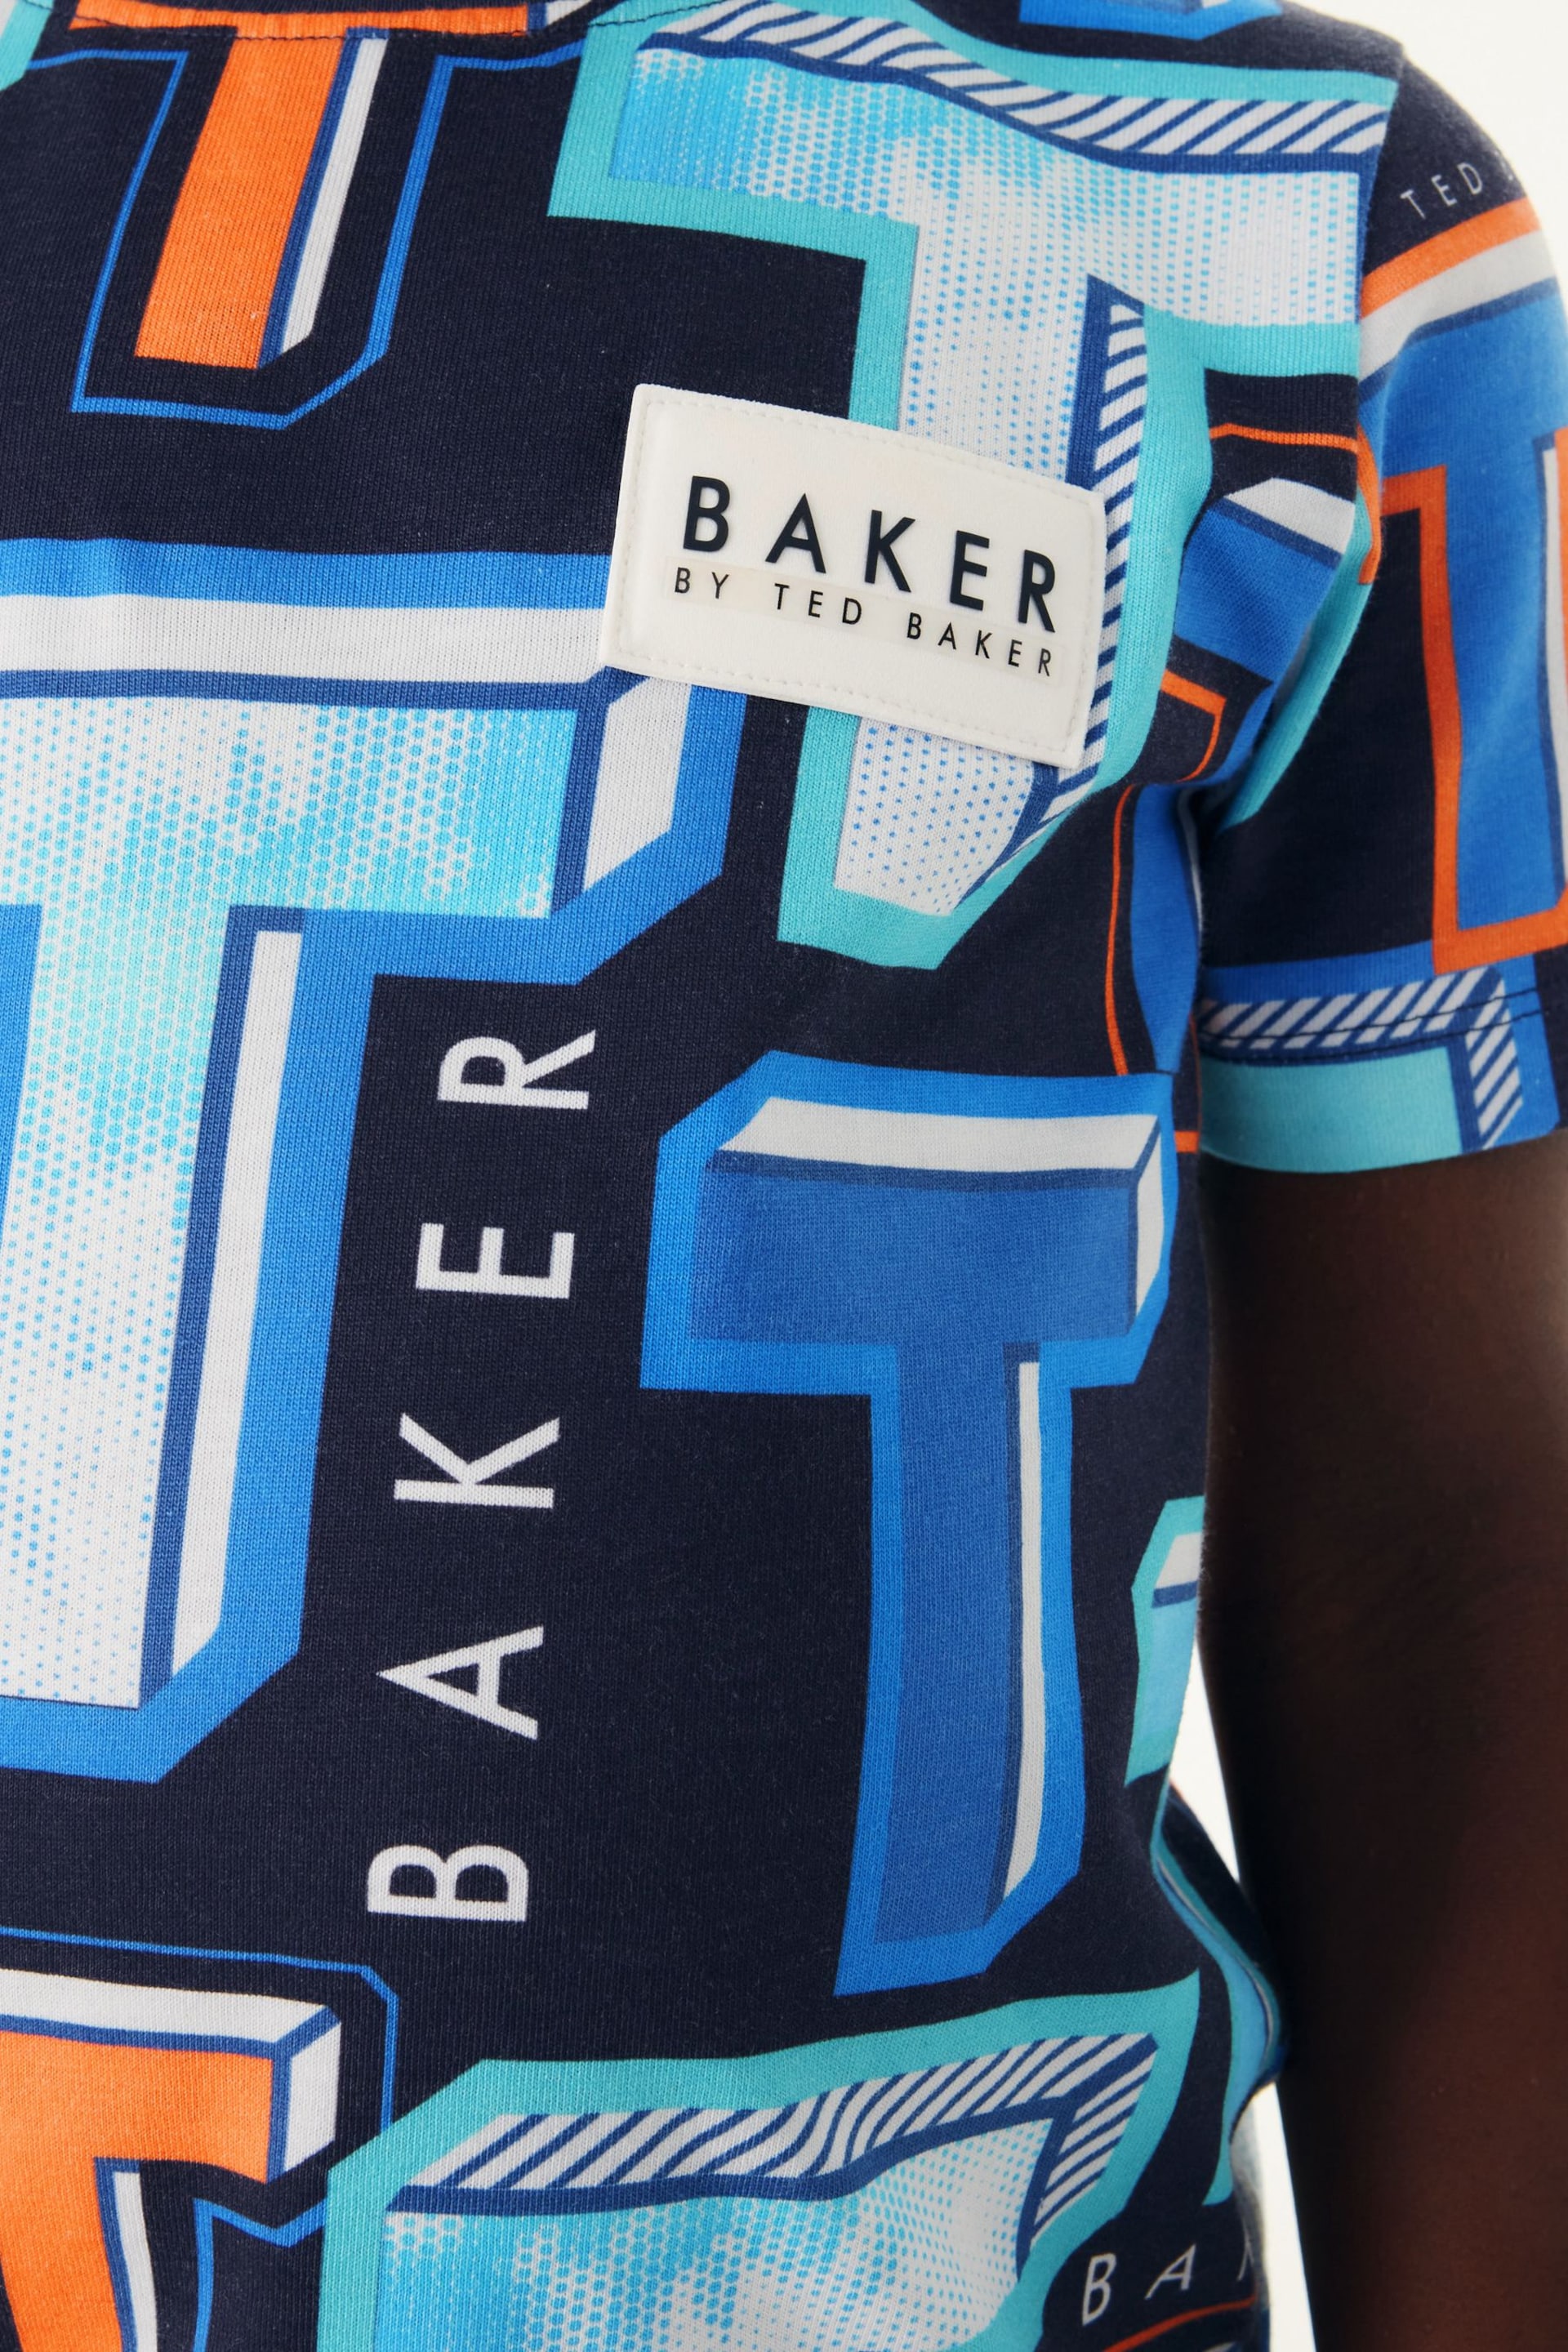 Baker by Ted Baker Graphic T-Shirt - Image 7 of 9